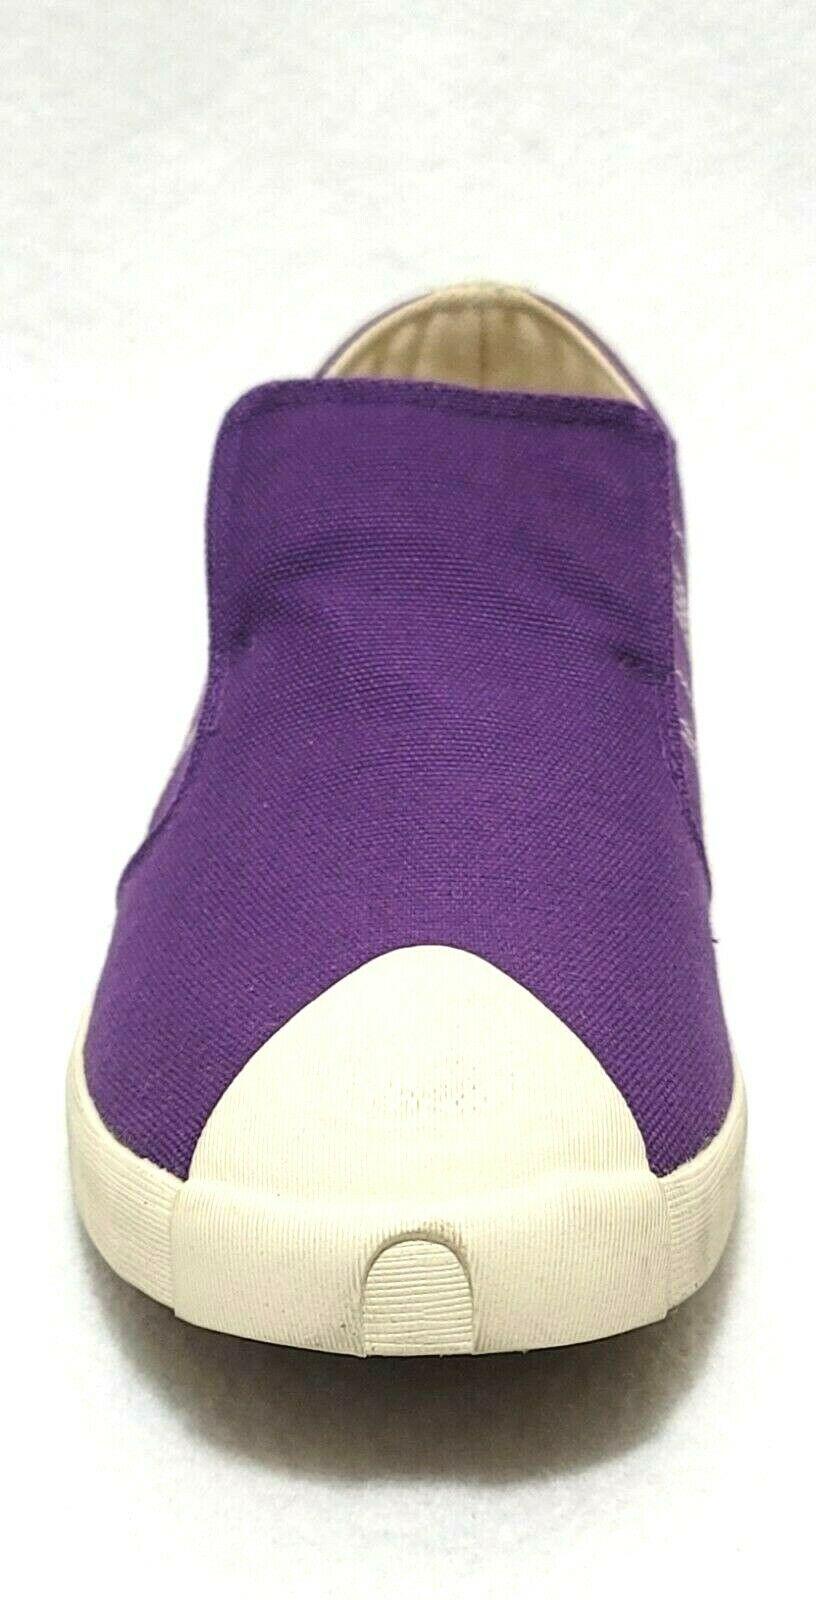 Diesel Sophomore Currant Purple Canvas Womens Fashion Sneakers  Shoes Size US 8.5 M - SVNYFancy